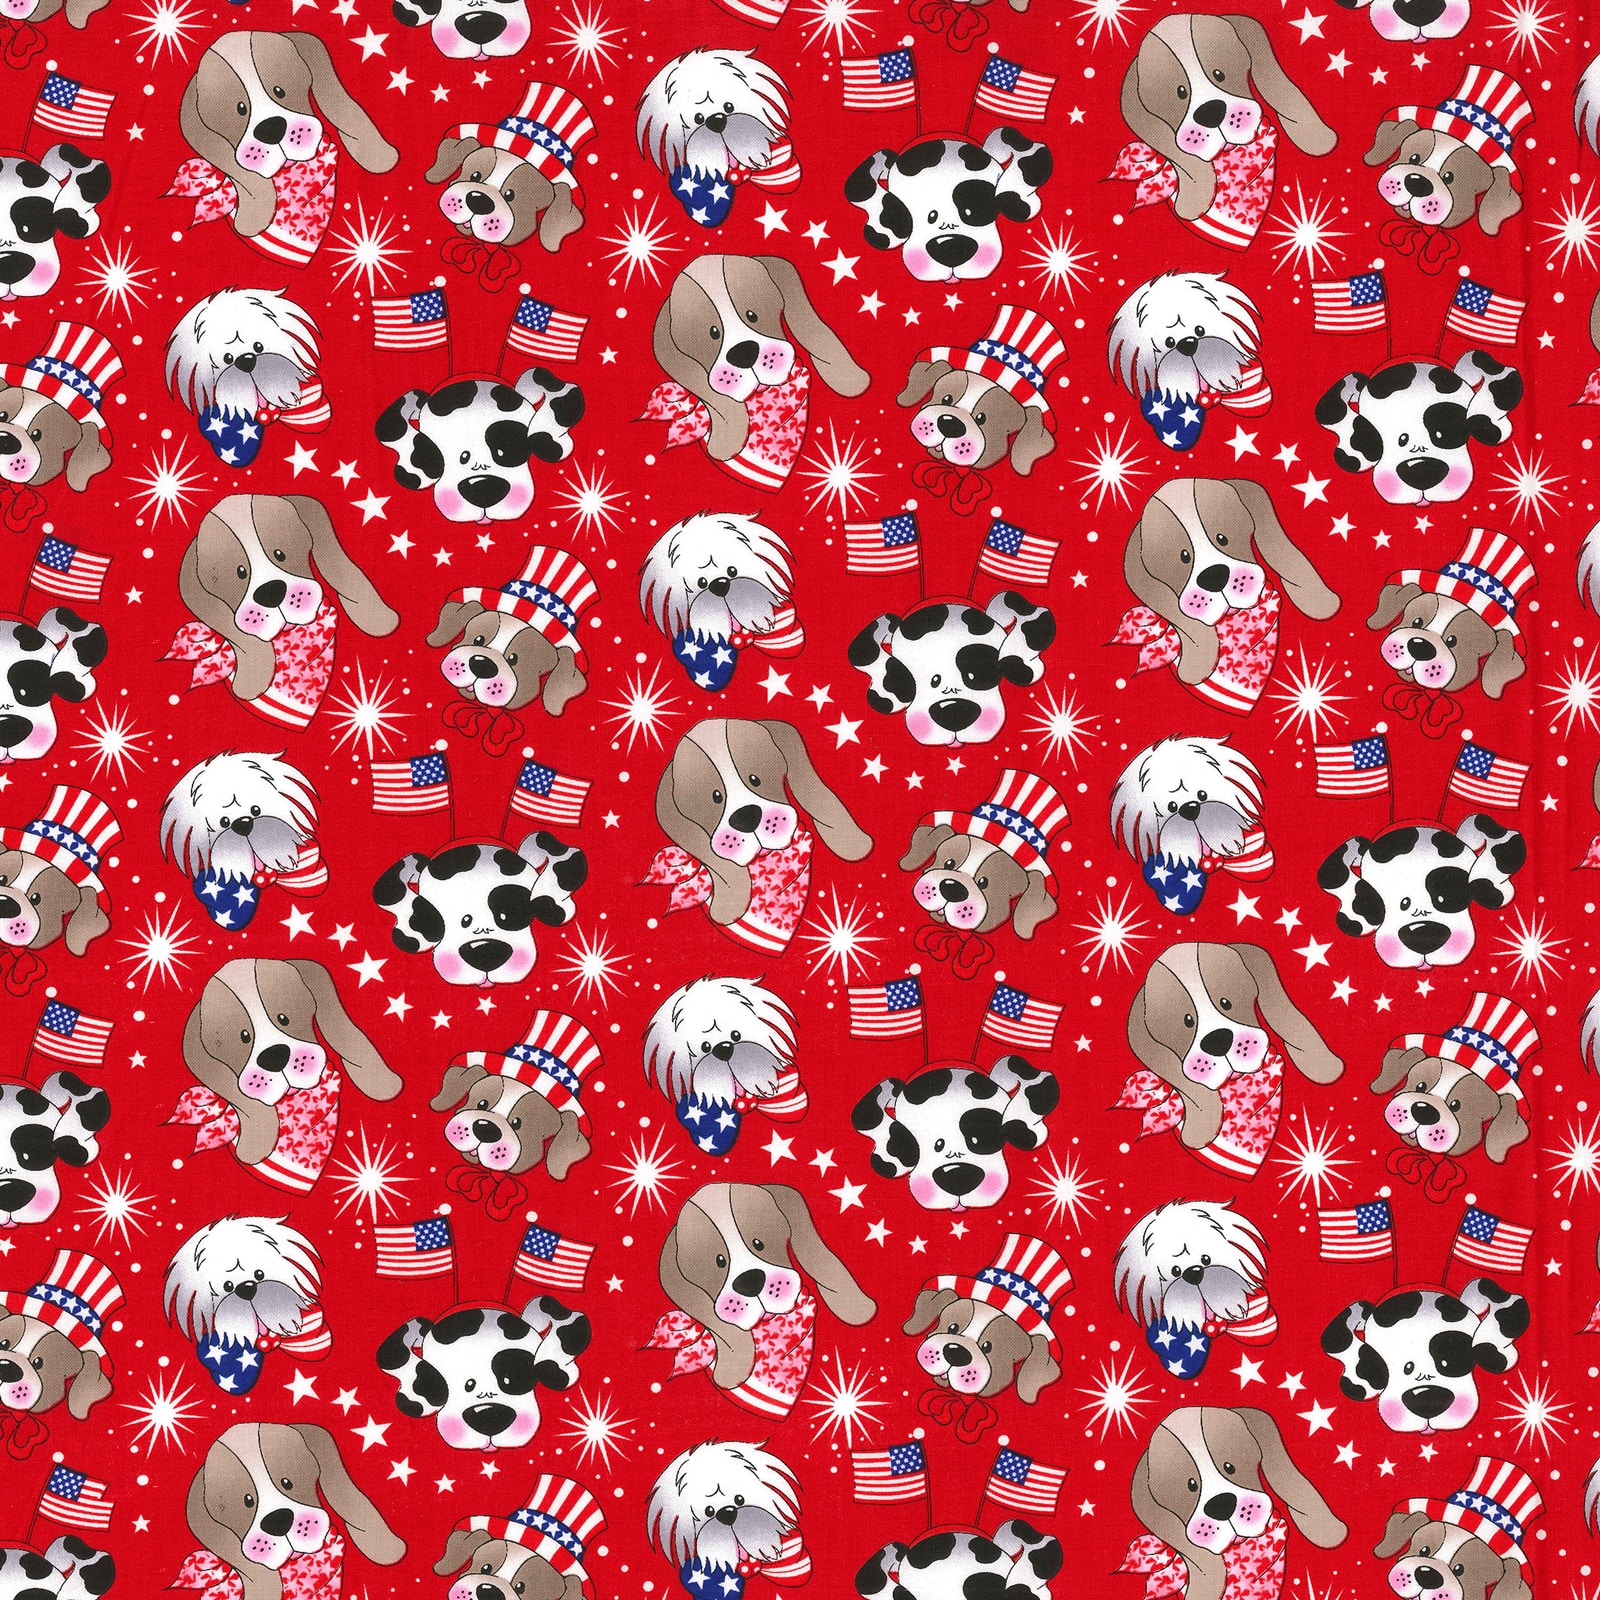 Fabric Traditions Red Patriotic Pups Novelty Cotton Fabric